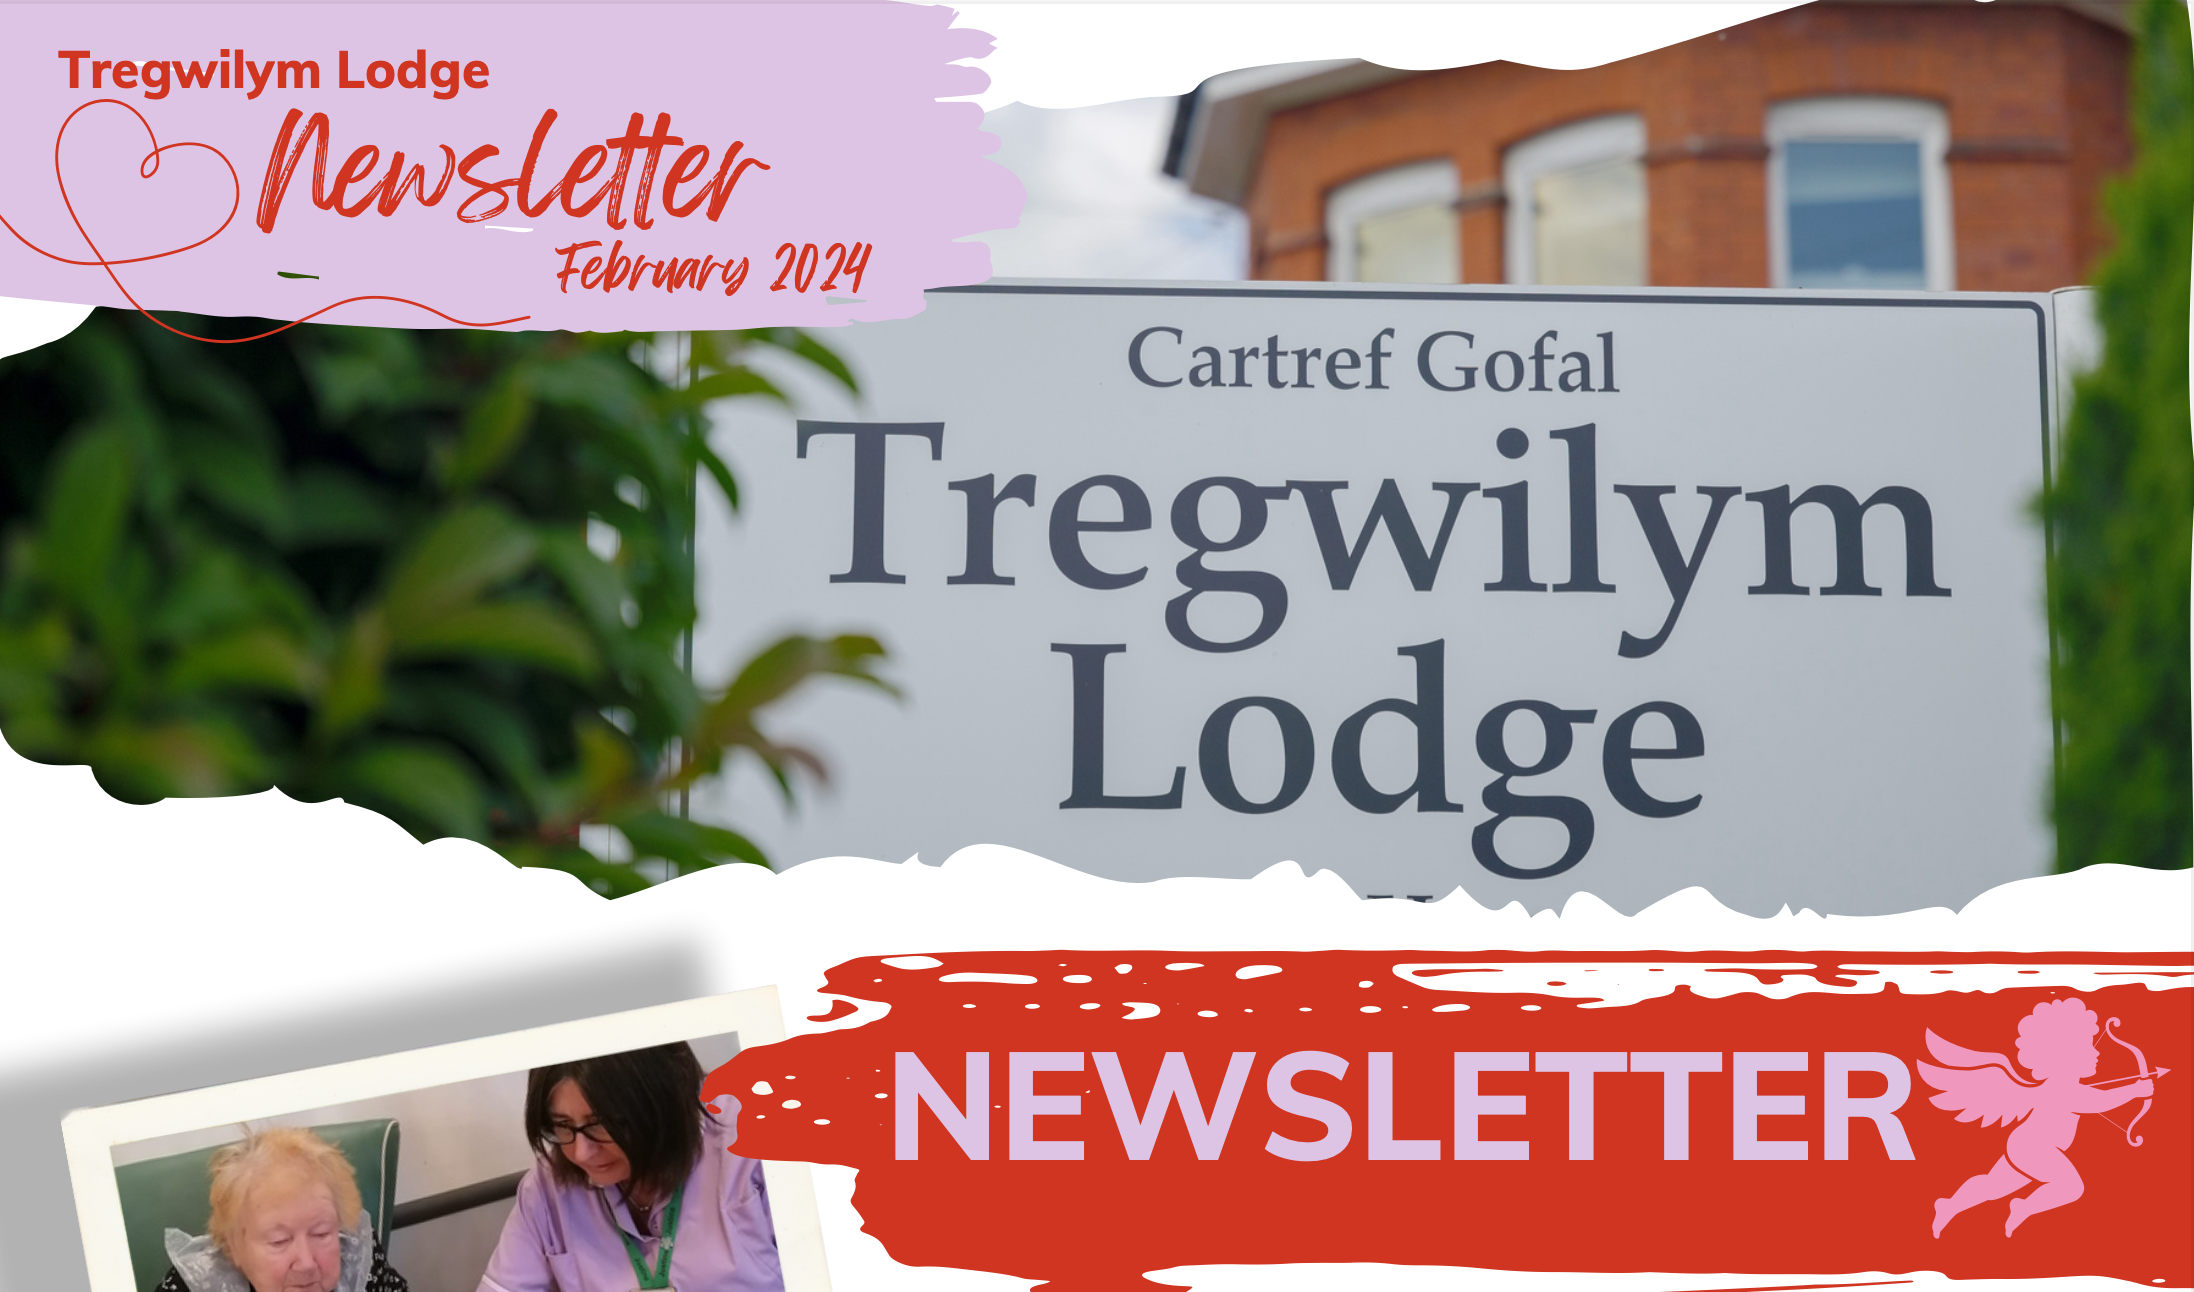 Feb News Letter at Tregwilym Lodge